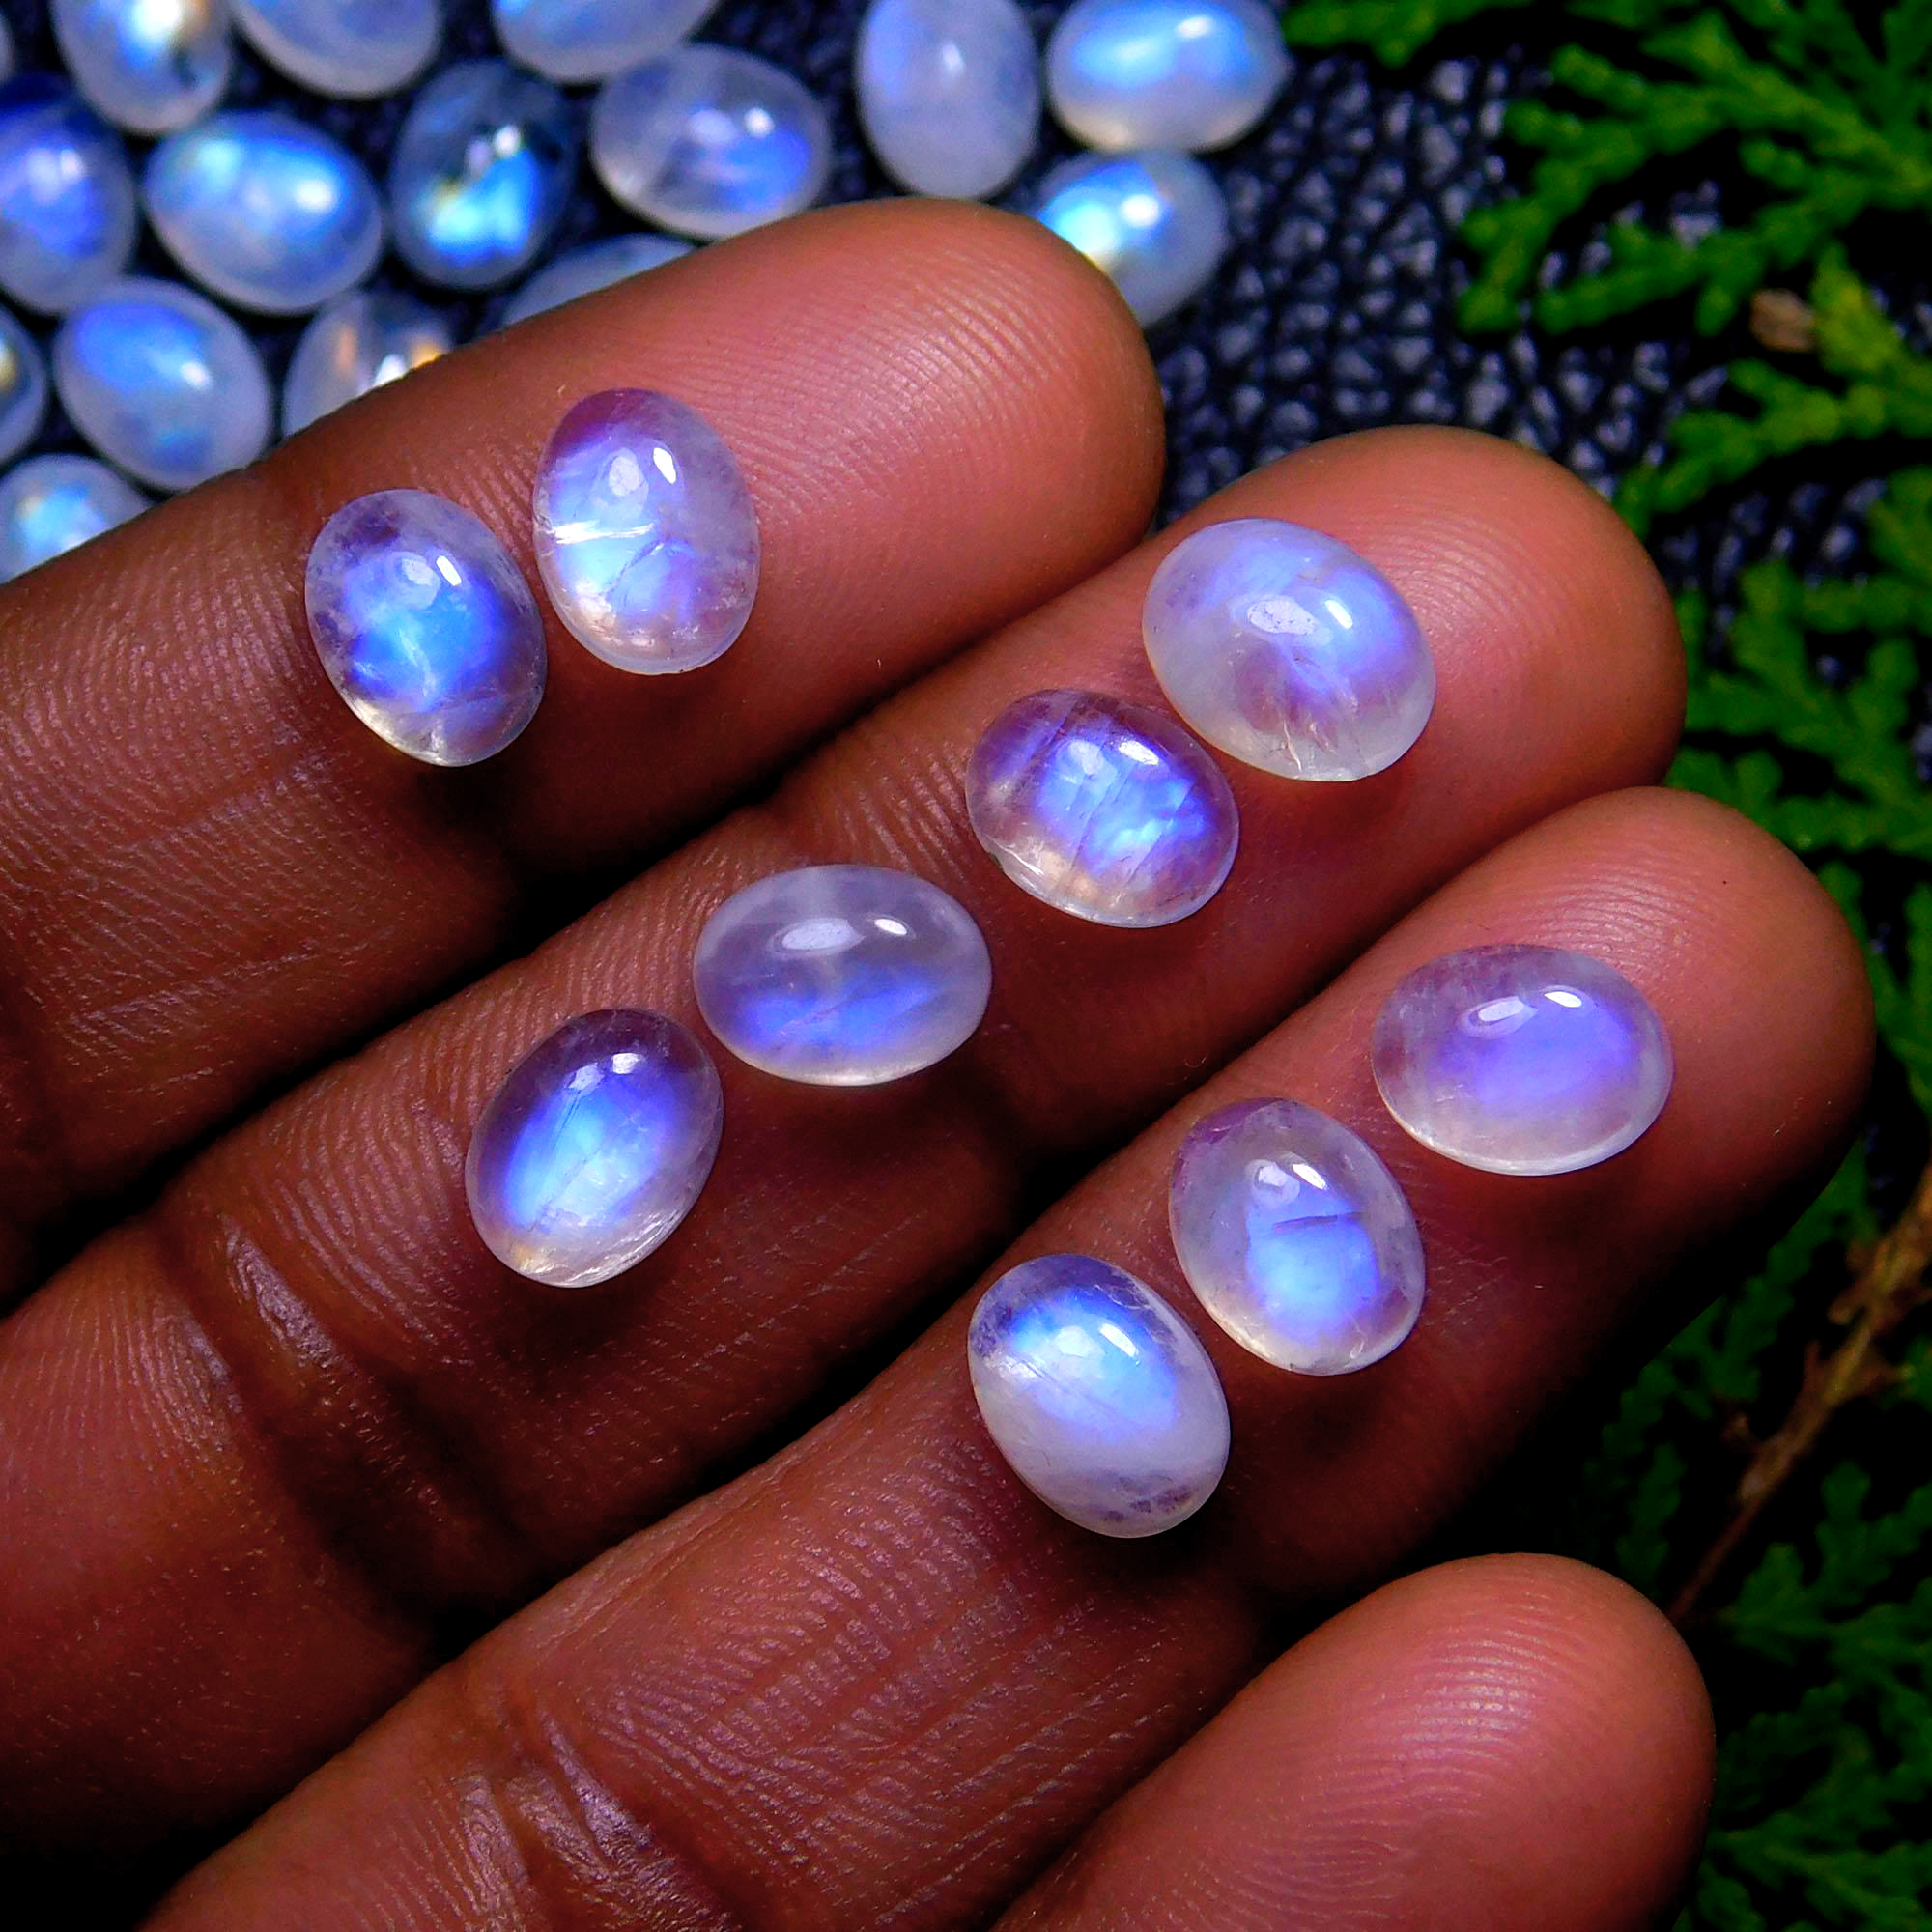 130Pcs 209Cts Natural Rainbow Moonstone Oval Shape Blue Fire Cabochon Lot Loose Gemstone Jewelry Crystal For Birthday Gift 8X6mm #9857